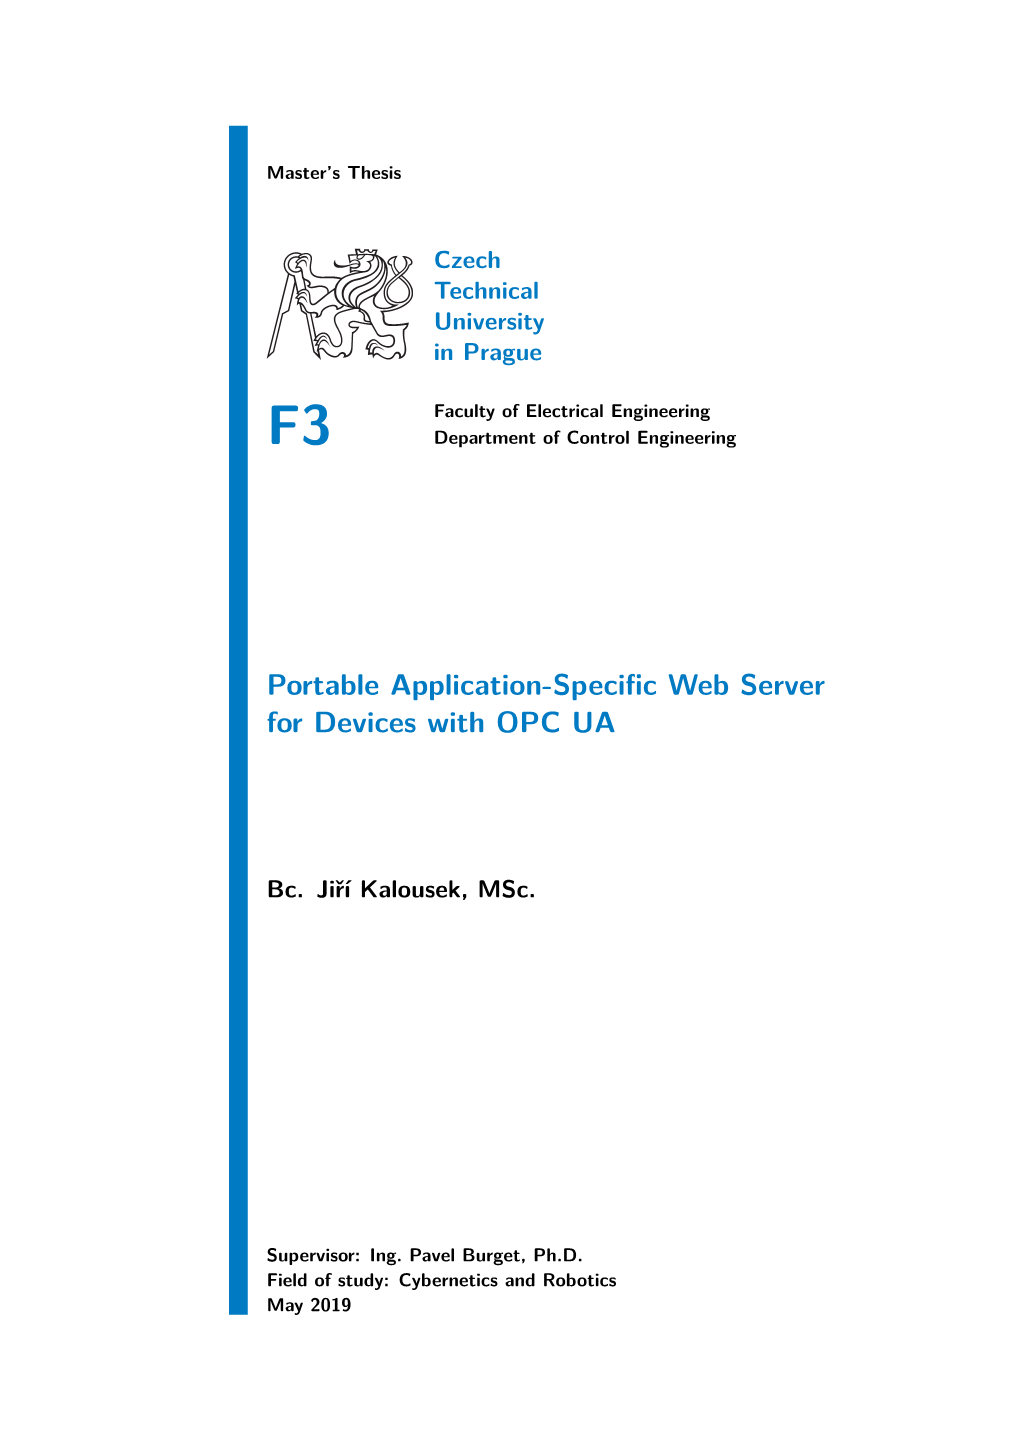 Portable Application-Specific Web Server for Devices with OPC UA